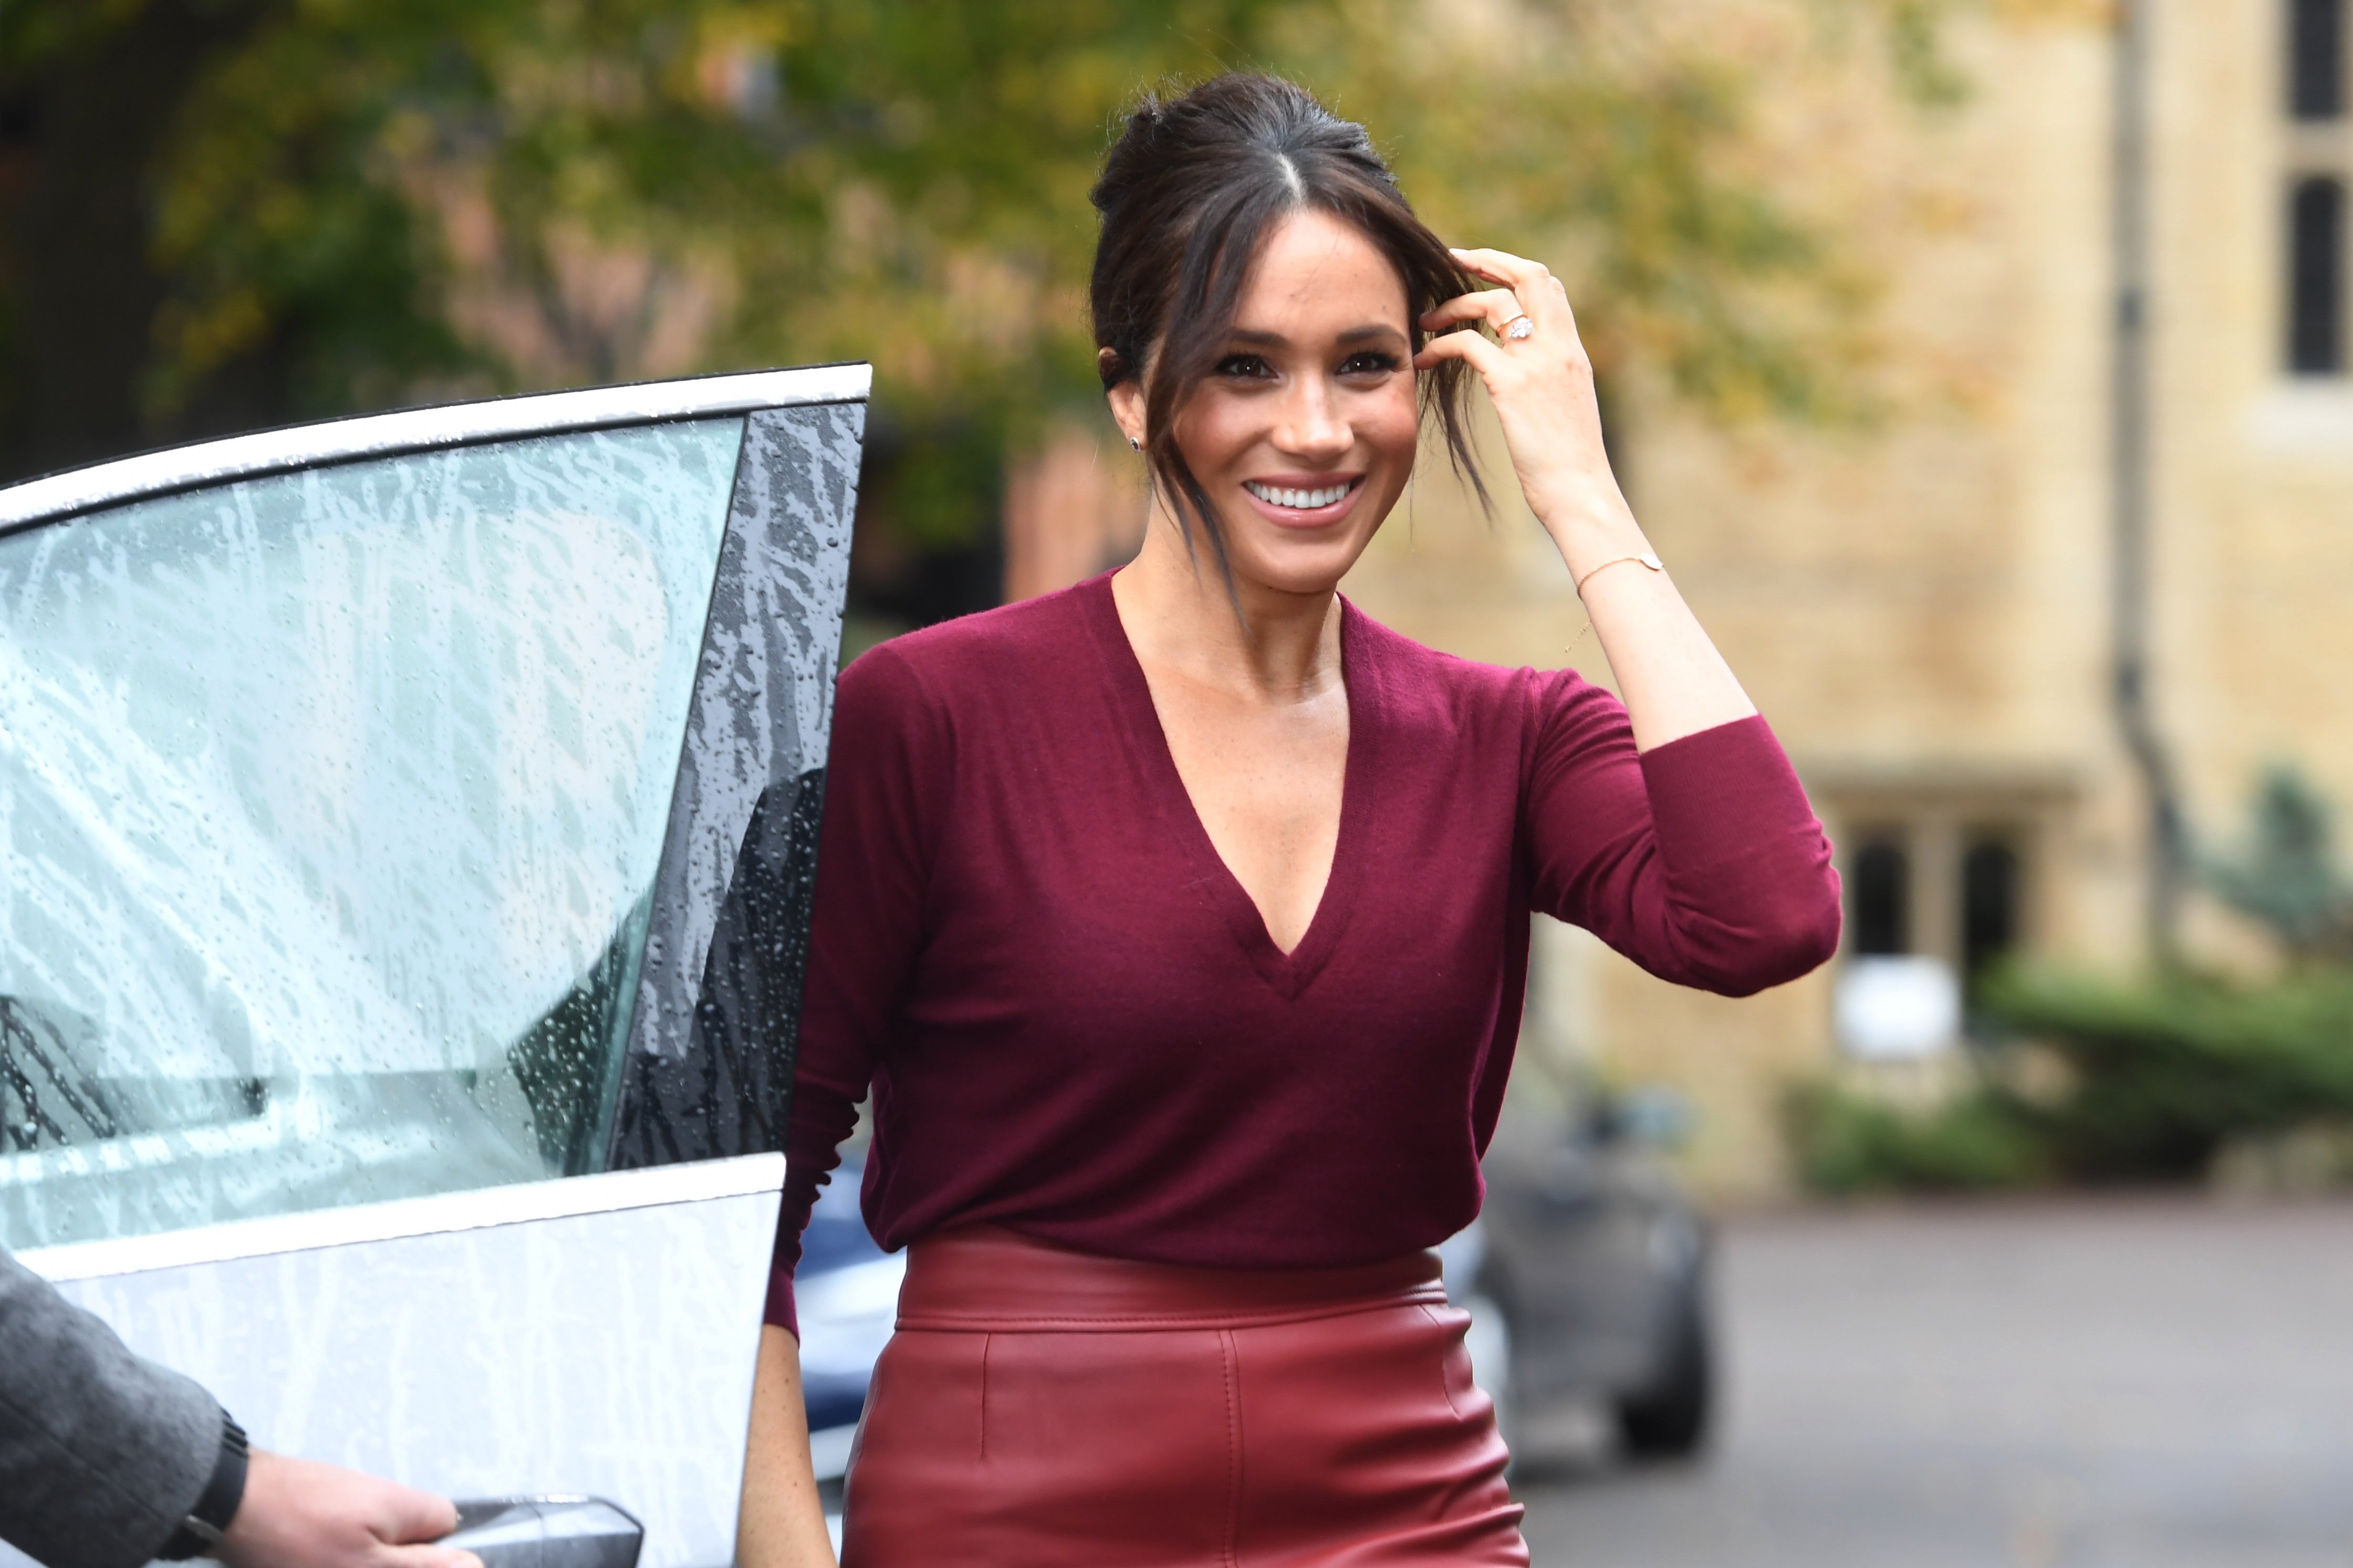 Meghan Markle attends a roundtable discussion on gender equality with The Queens Commonwealth Trust (QCT) and One Young World at Windsor Castle on October 25, 2019 | Photo: Getty Images